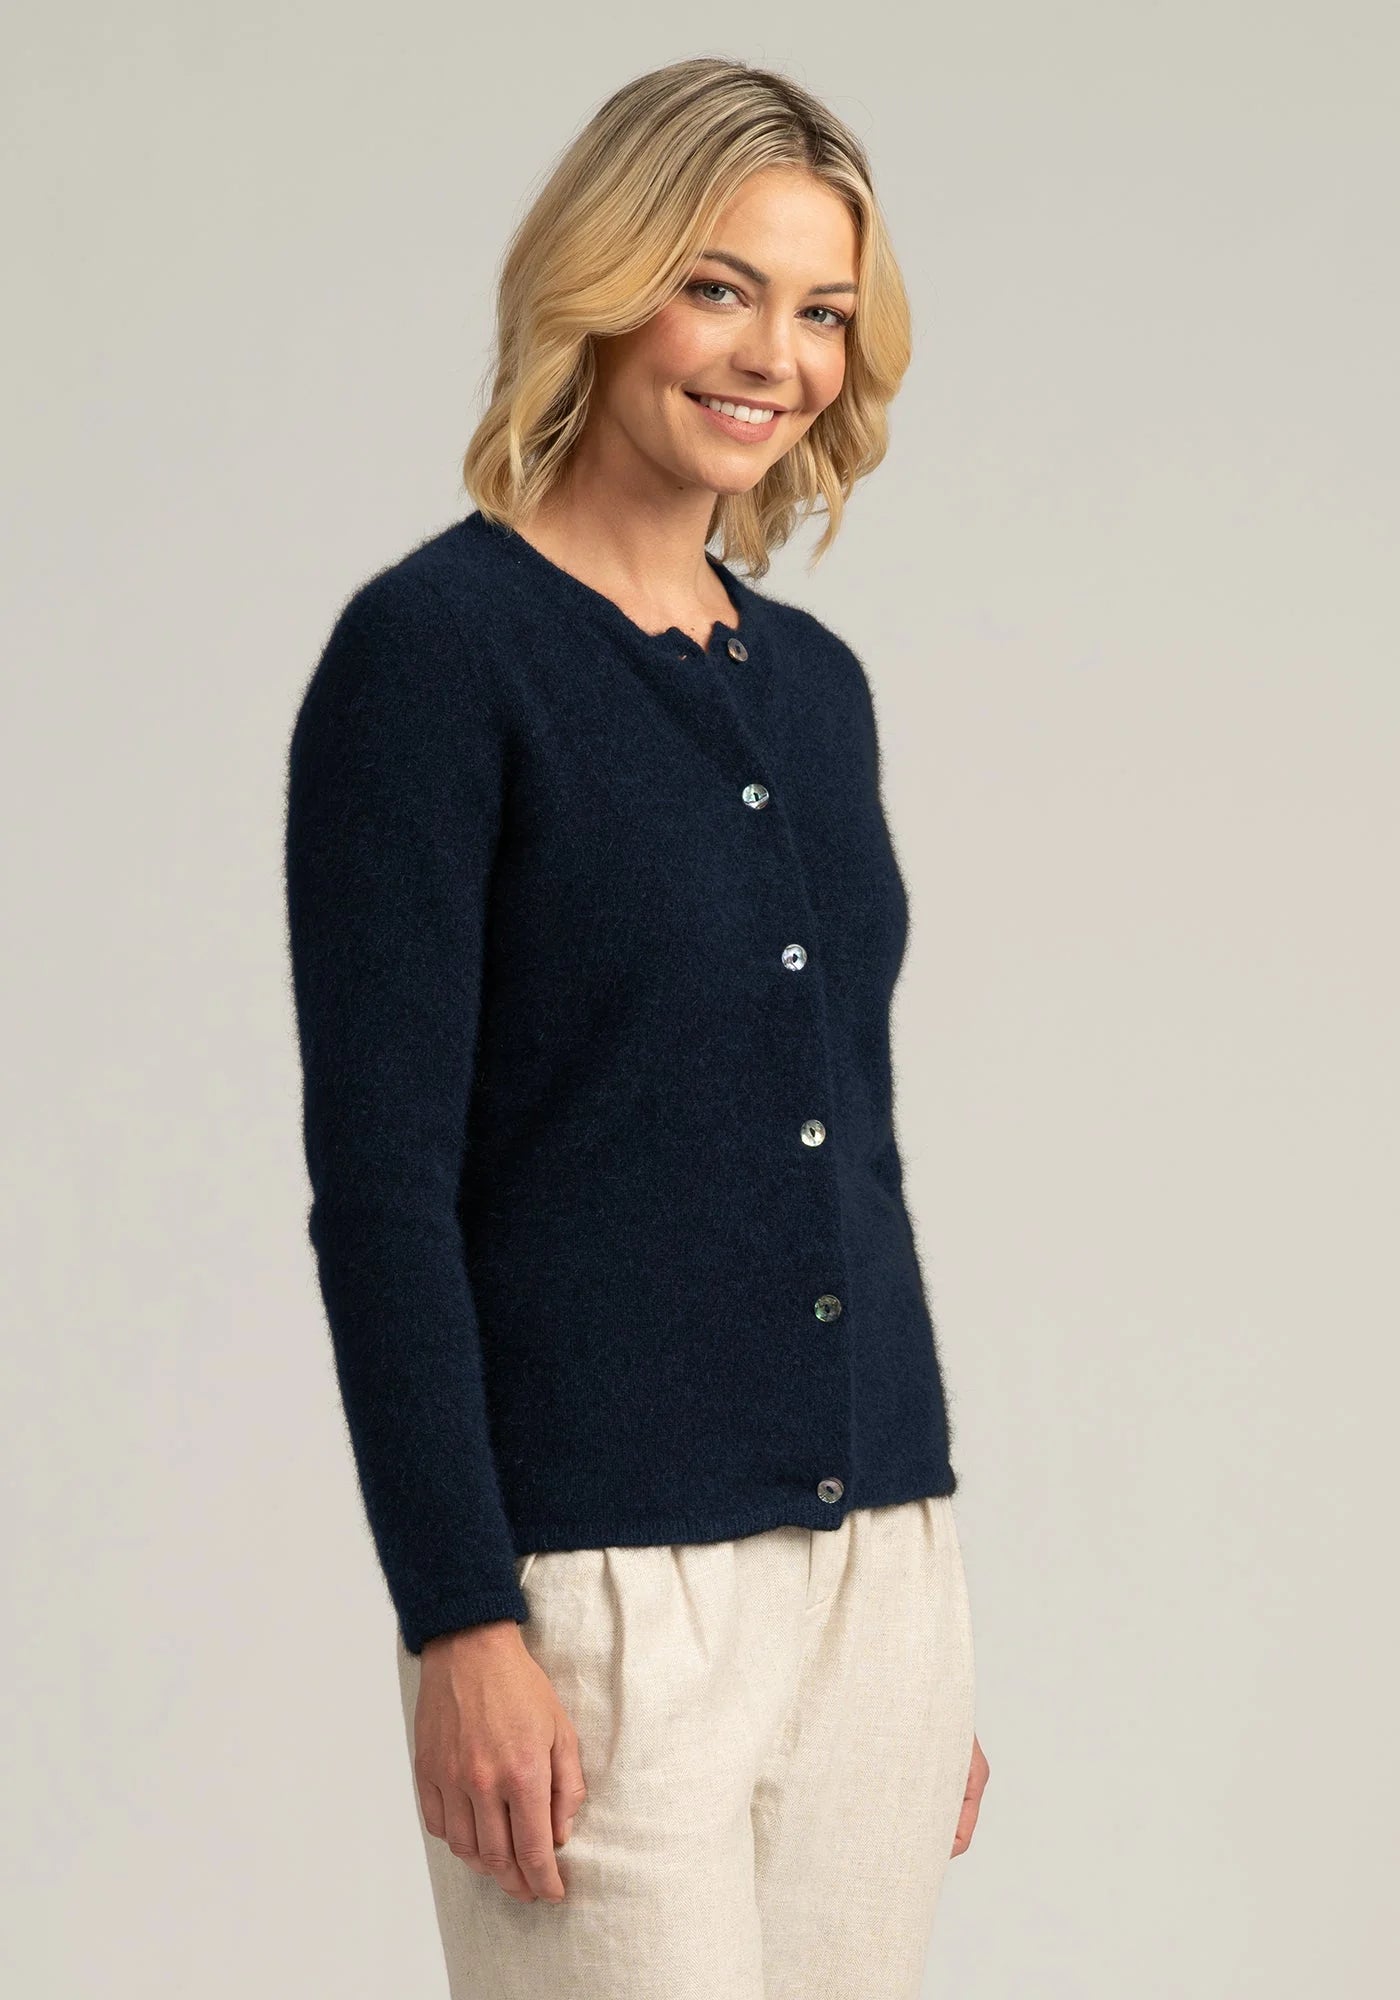 Indulge in luxury with our navy blue merino wool cardi. Perfect blend of warmth and sophistication. Limited stock—shop your size today!